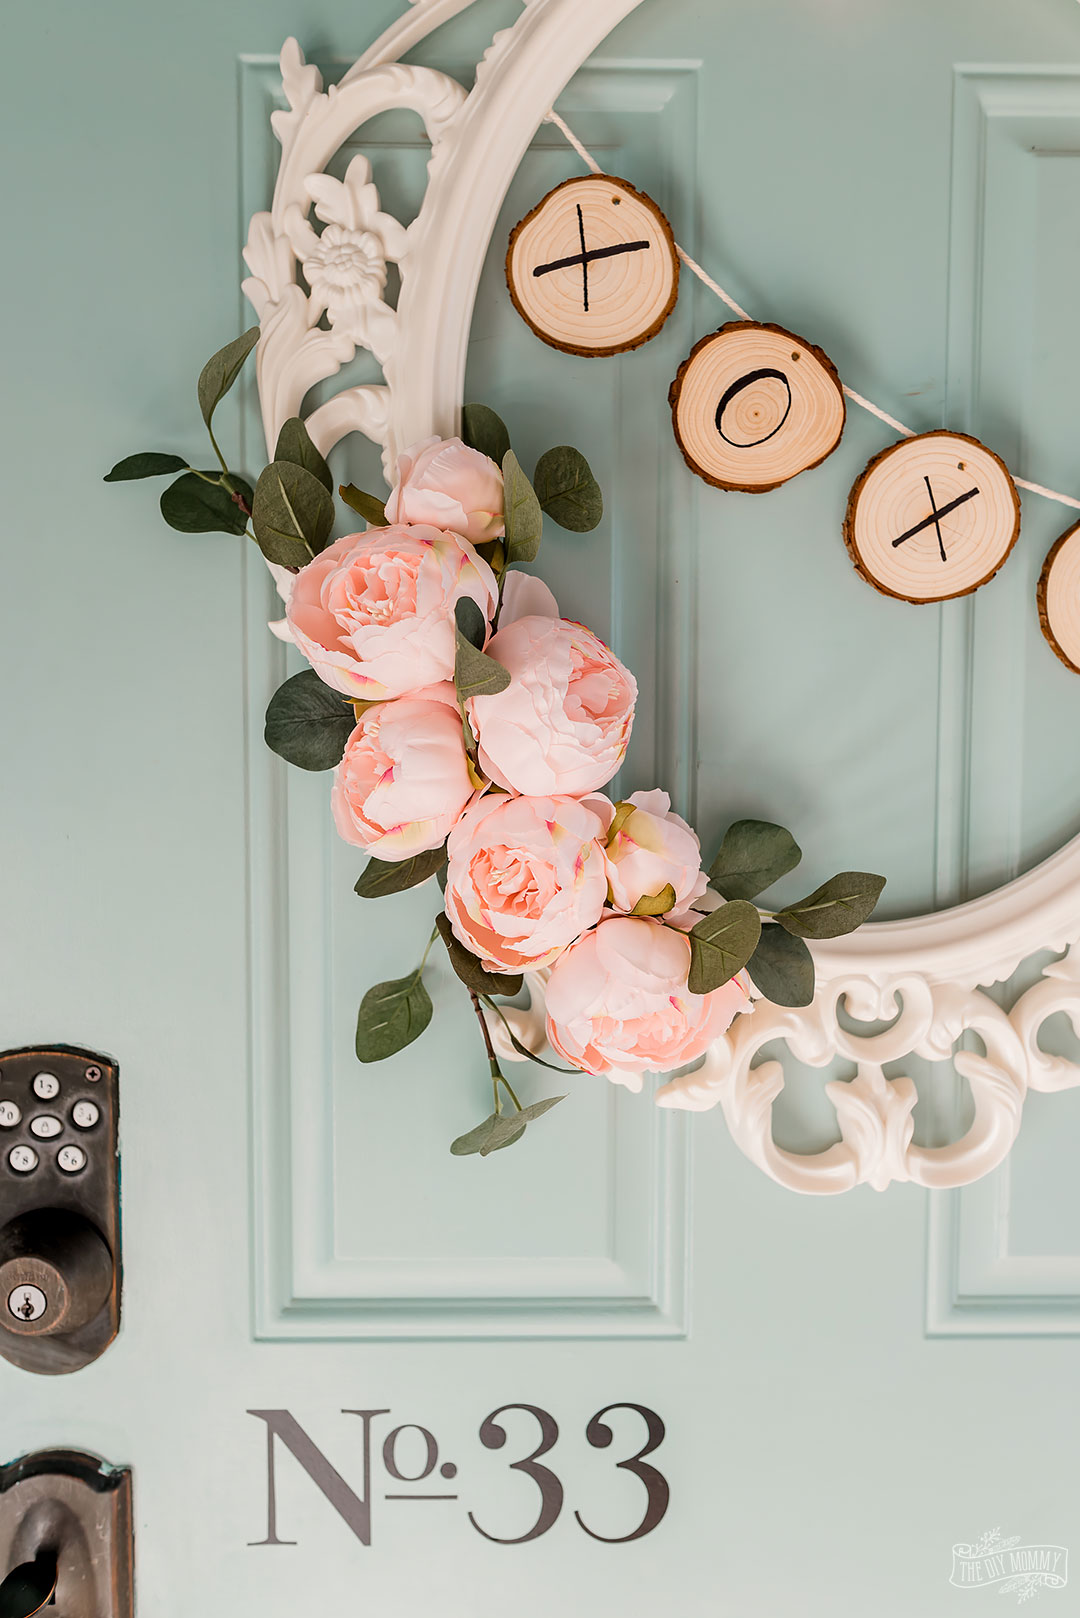 Let's make a romantic Valentine's Day wreath from an old IKEA picture frame! This DIY wreath is easy to make, and it has such a sweet vibe that's perfect for your Valentine decor.